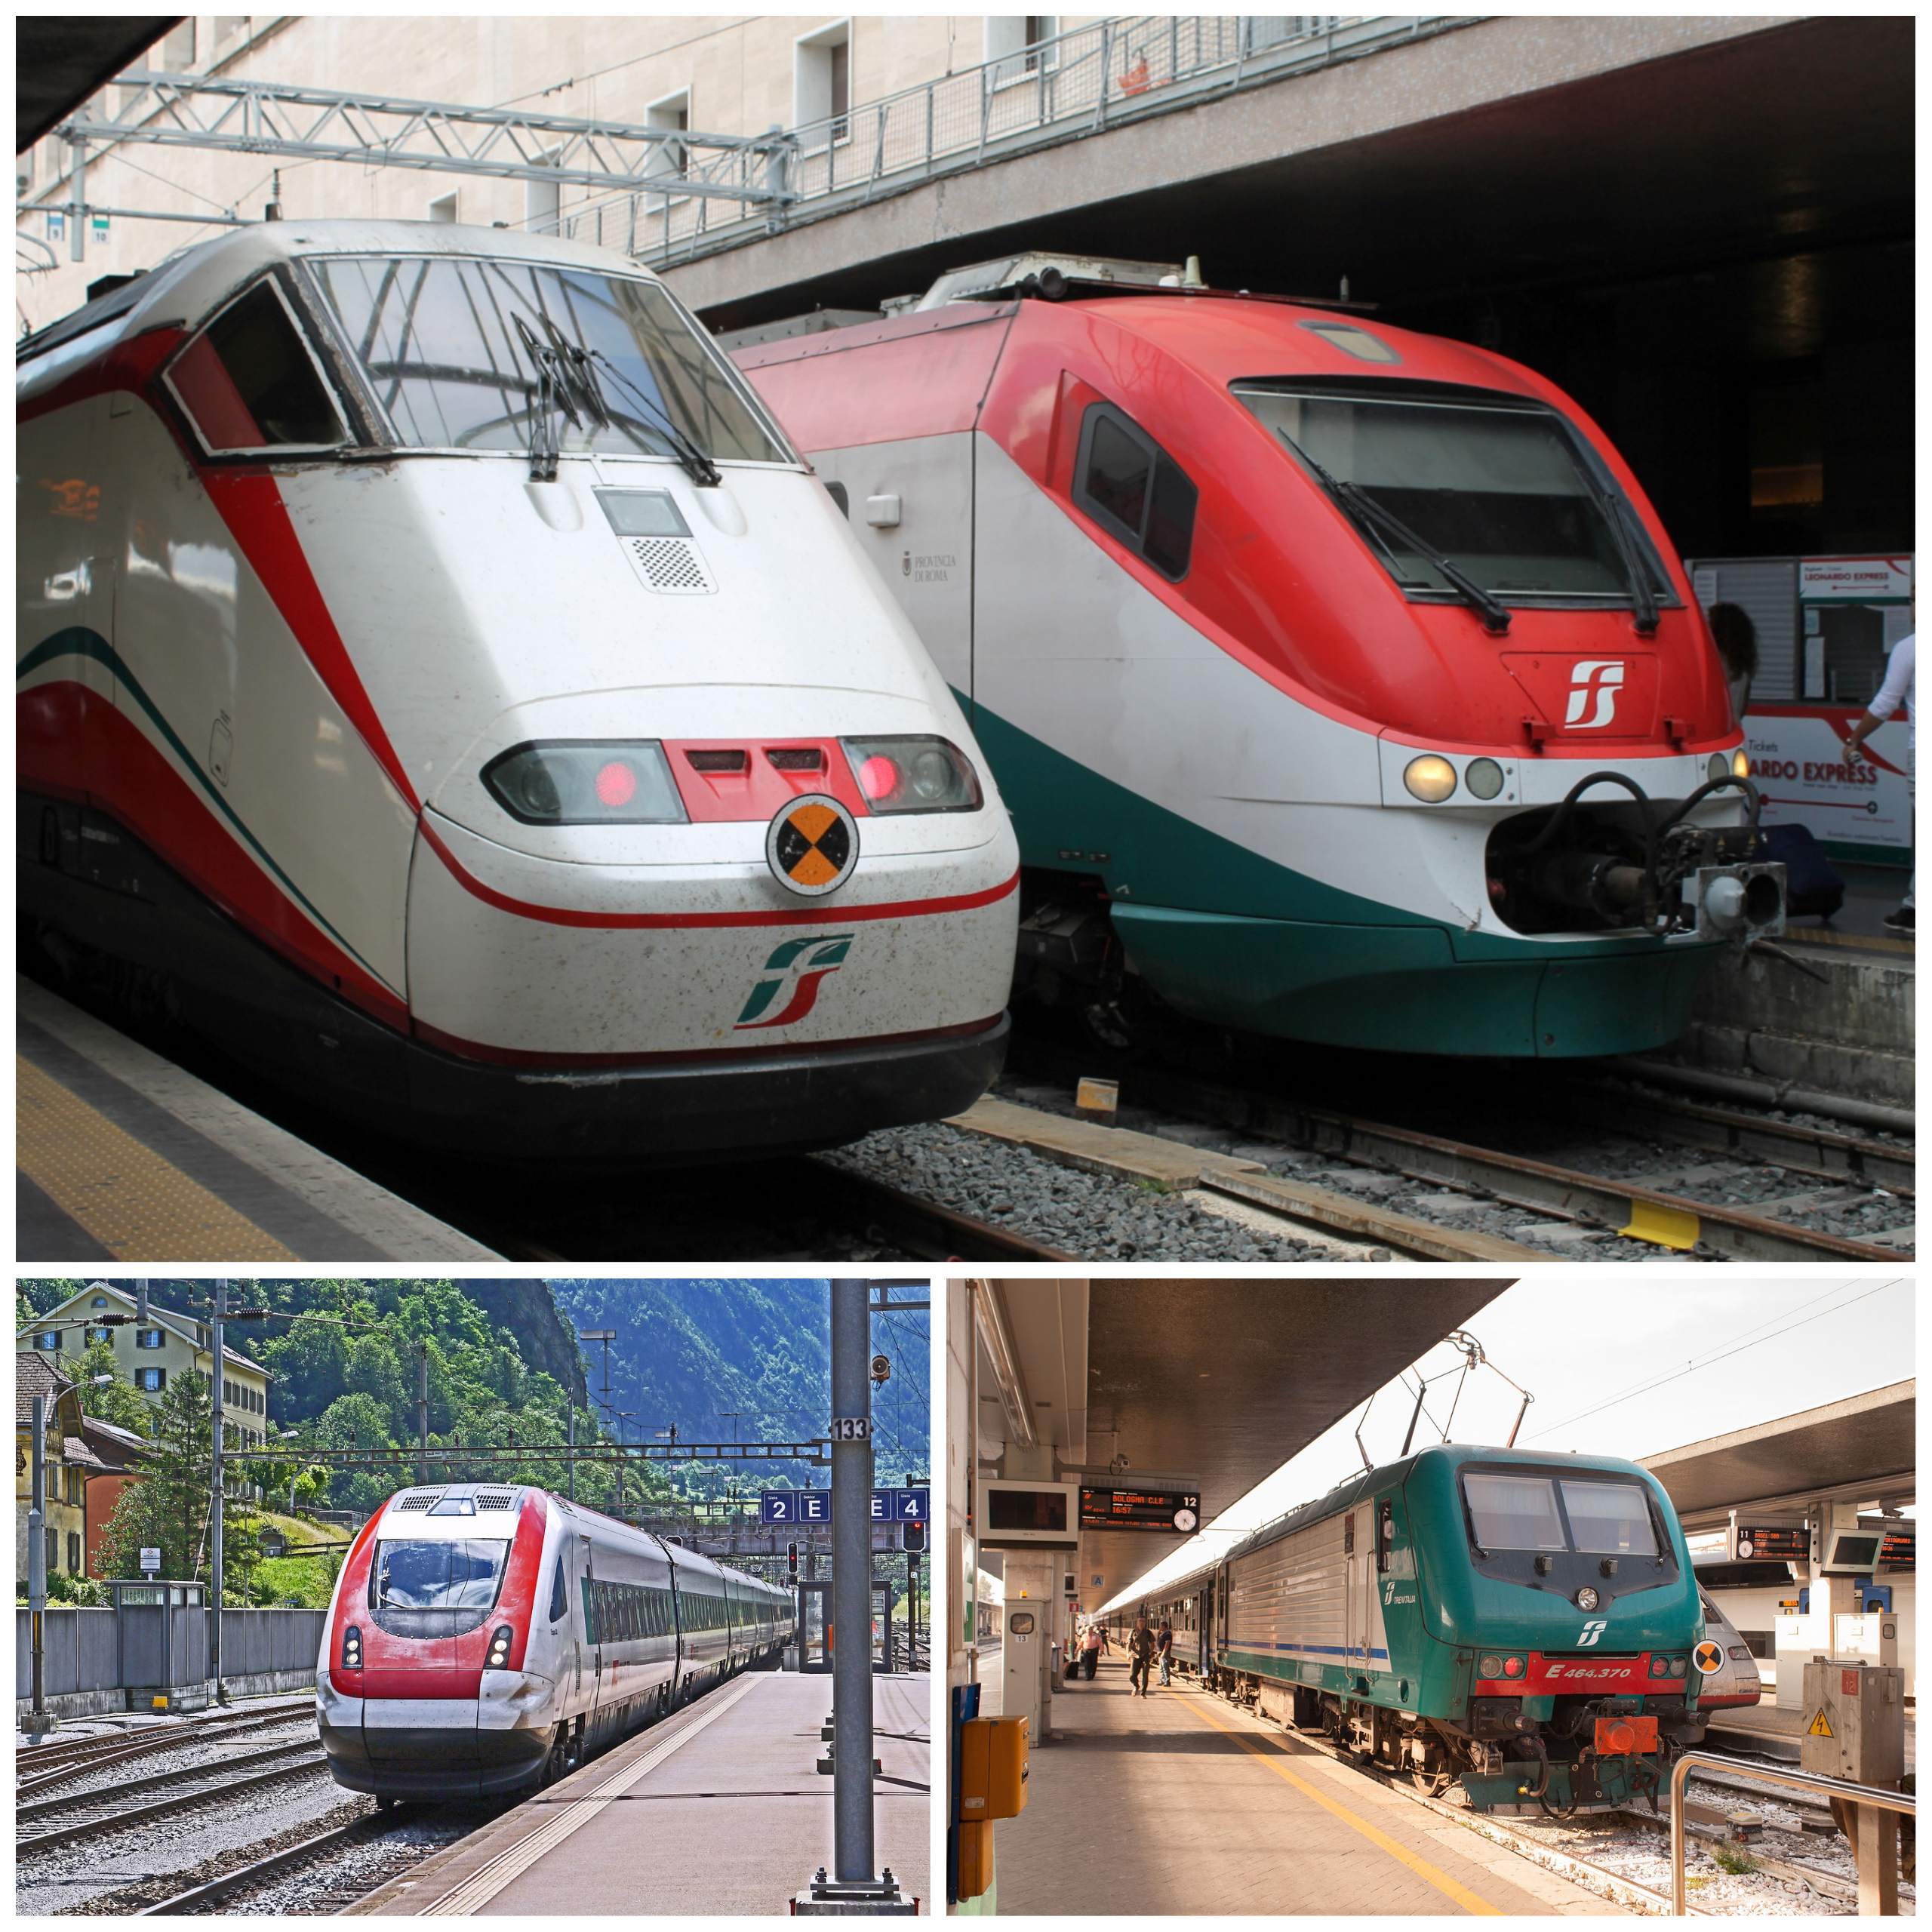 Beginner's Guide to Riding the High Speed Trains in Italy